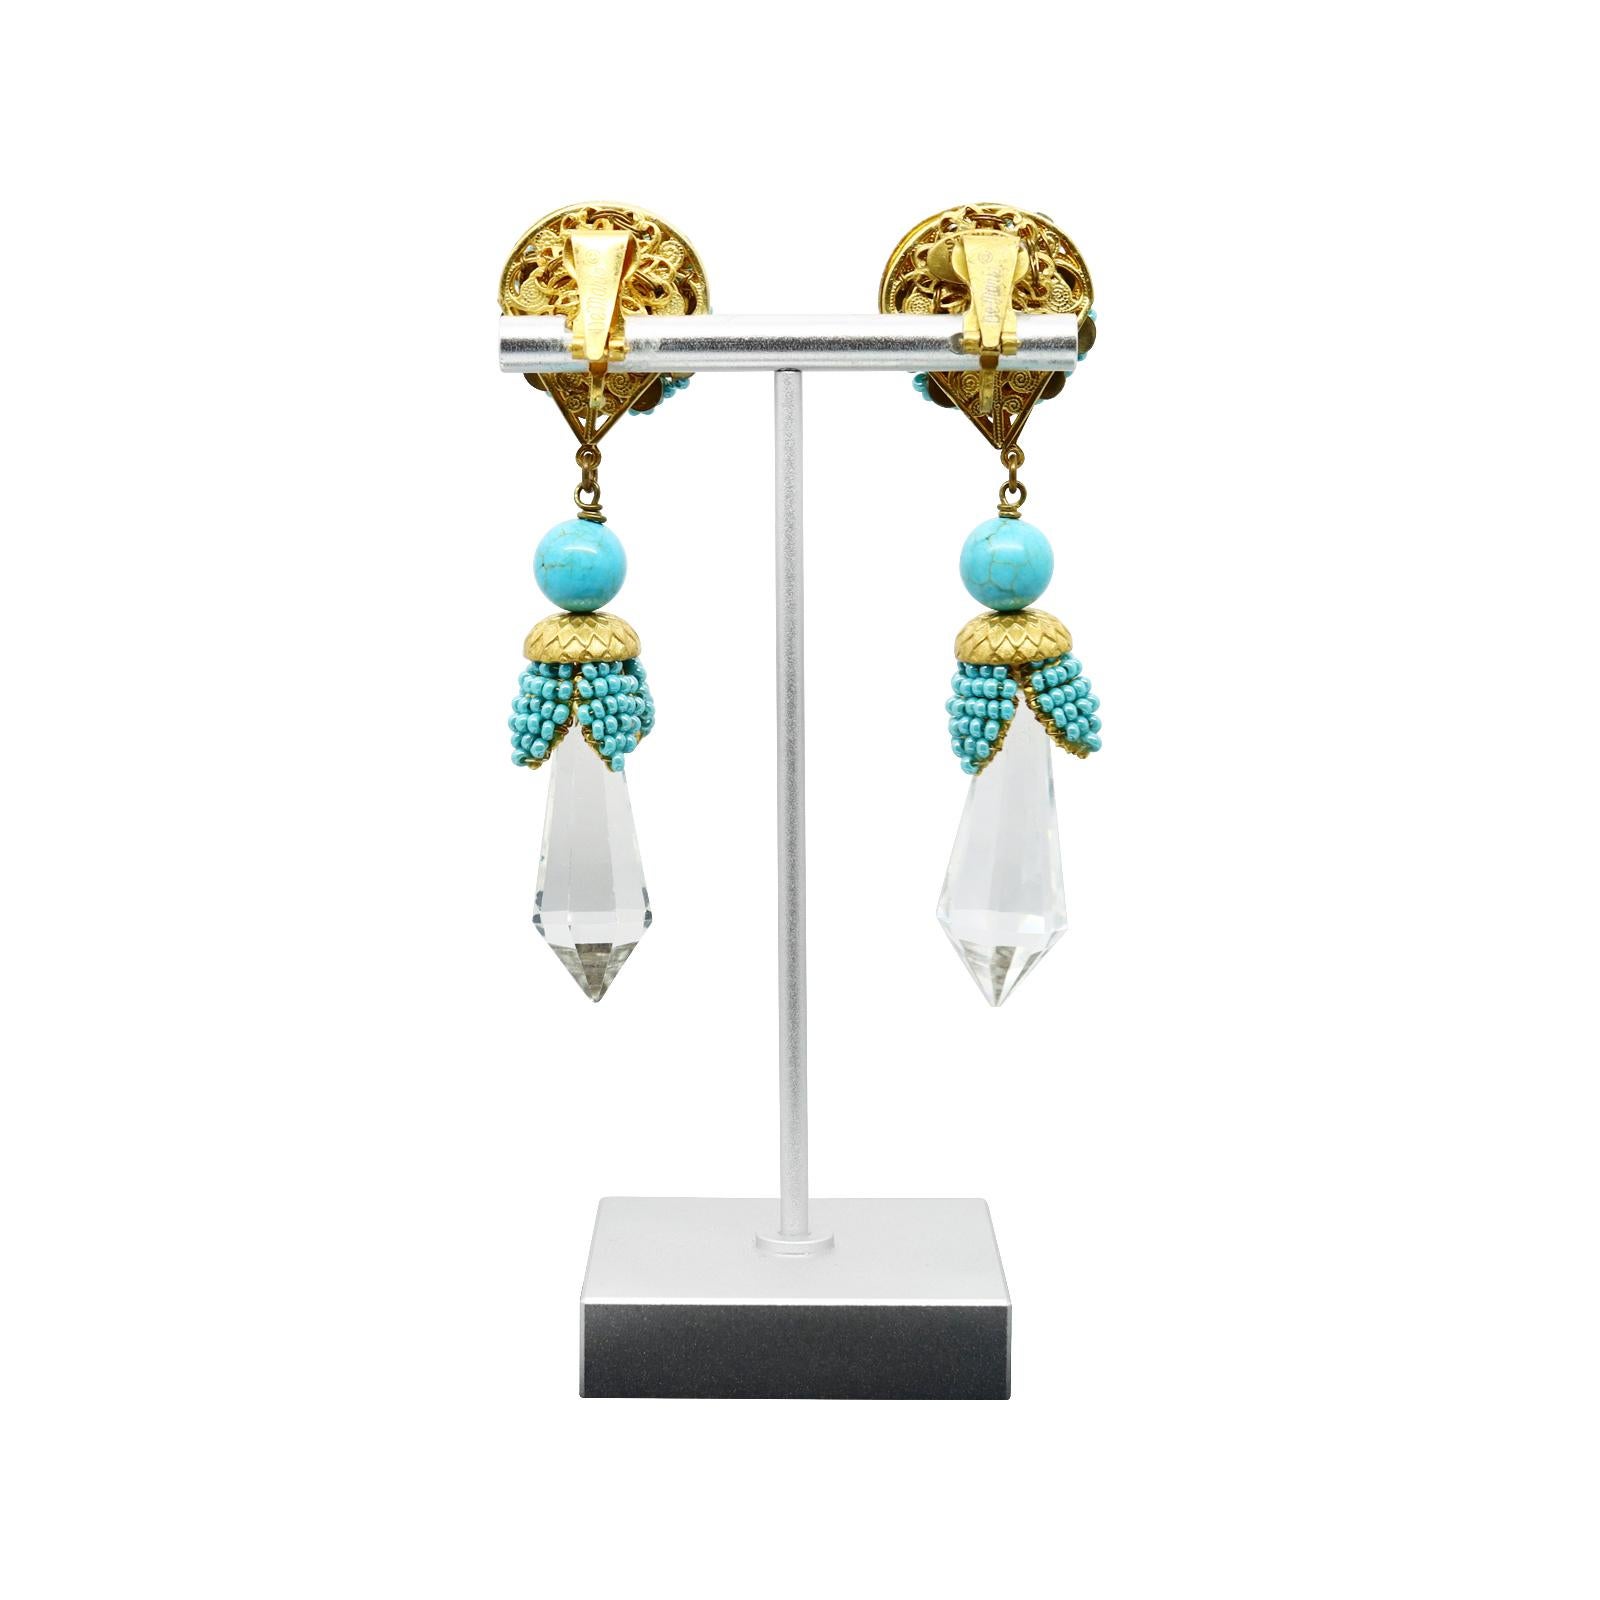 Vintage Stanley Hagler Faux Turquoise Dangling Crystal Earrings Circa 1960s For Sale 1